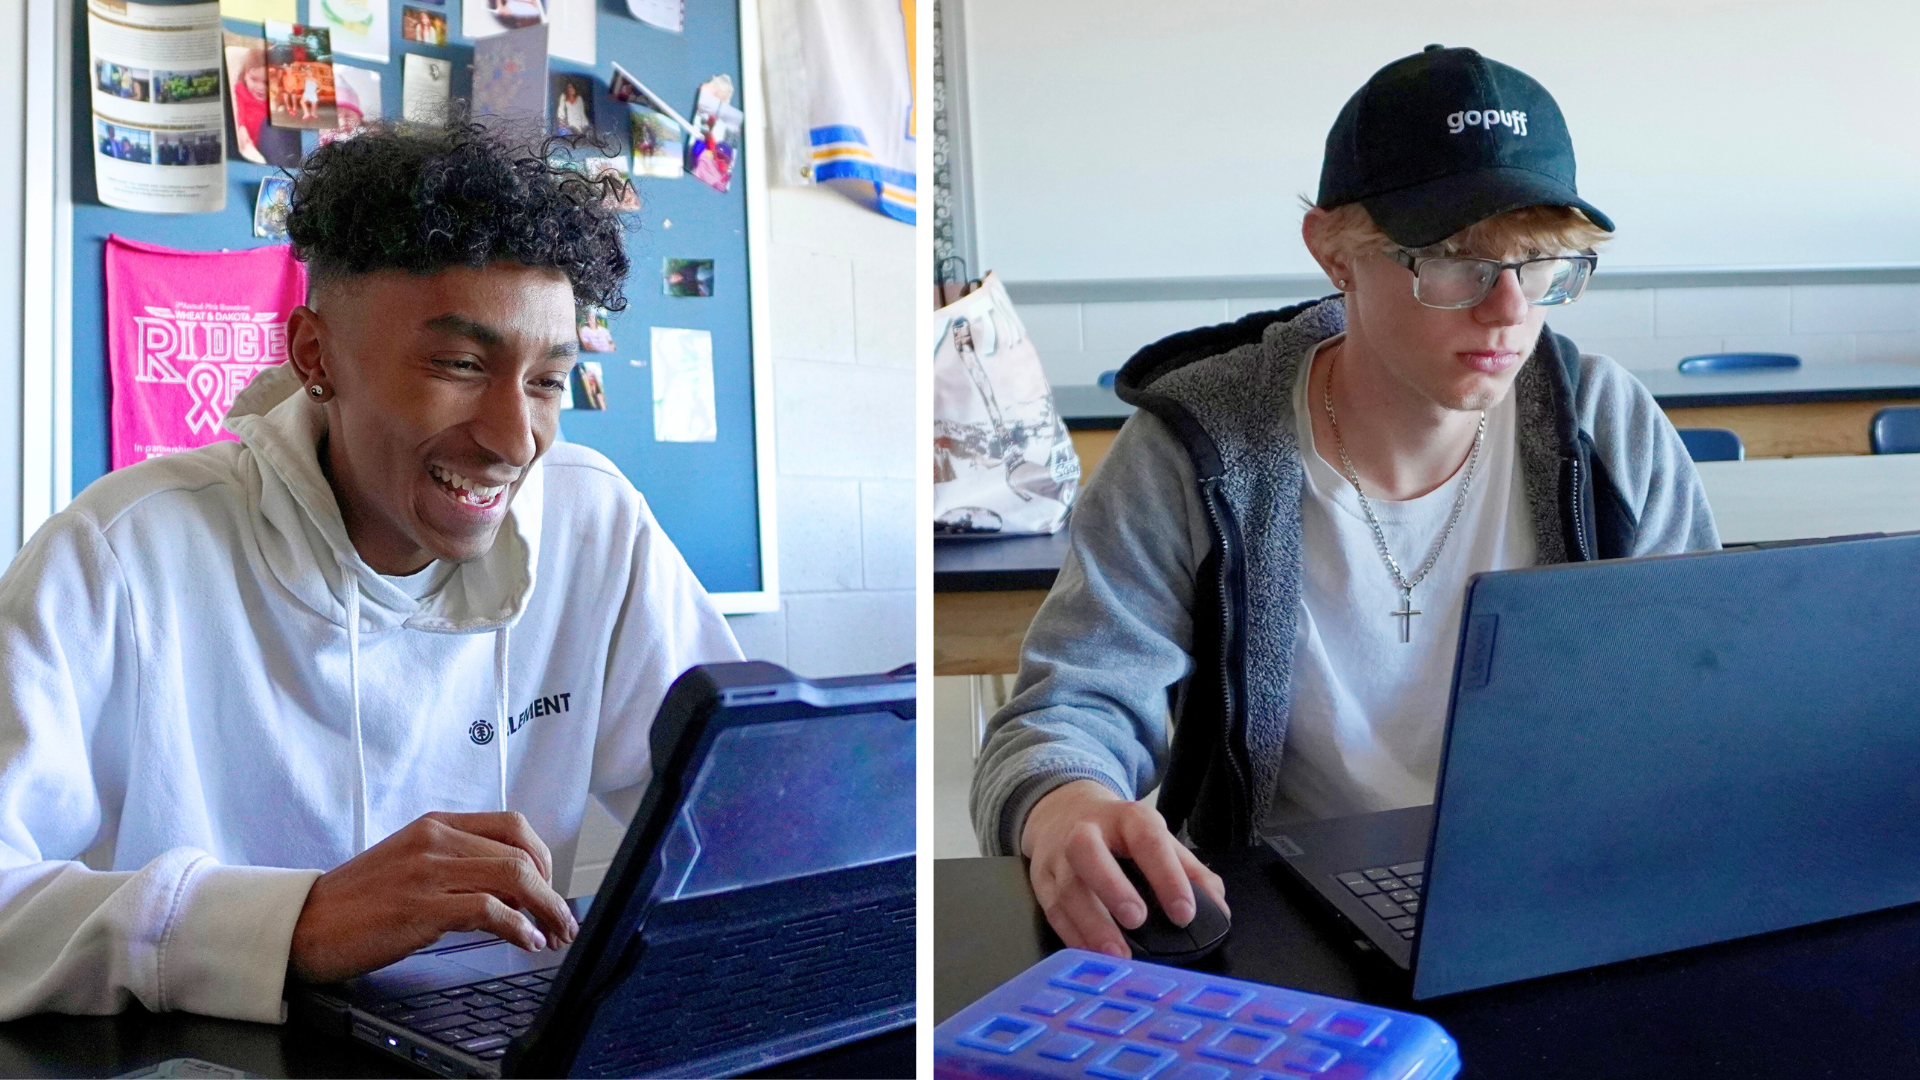 How Easterseals Colorado Empowers Students With a Digital Literacy and Employment Training Program